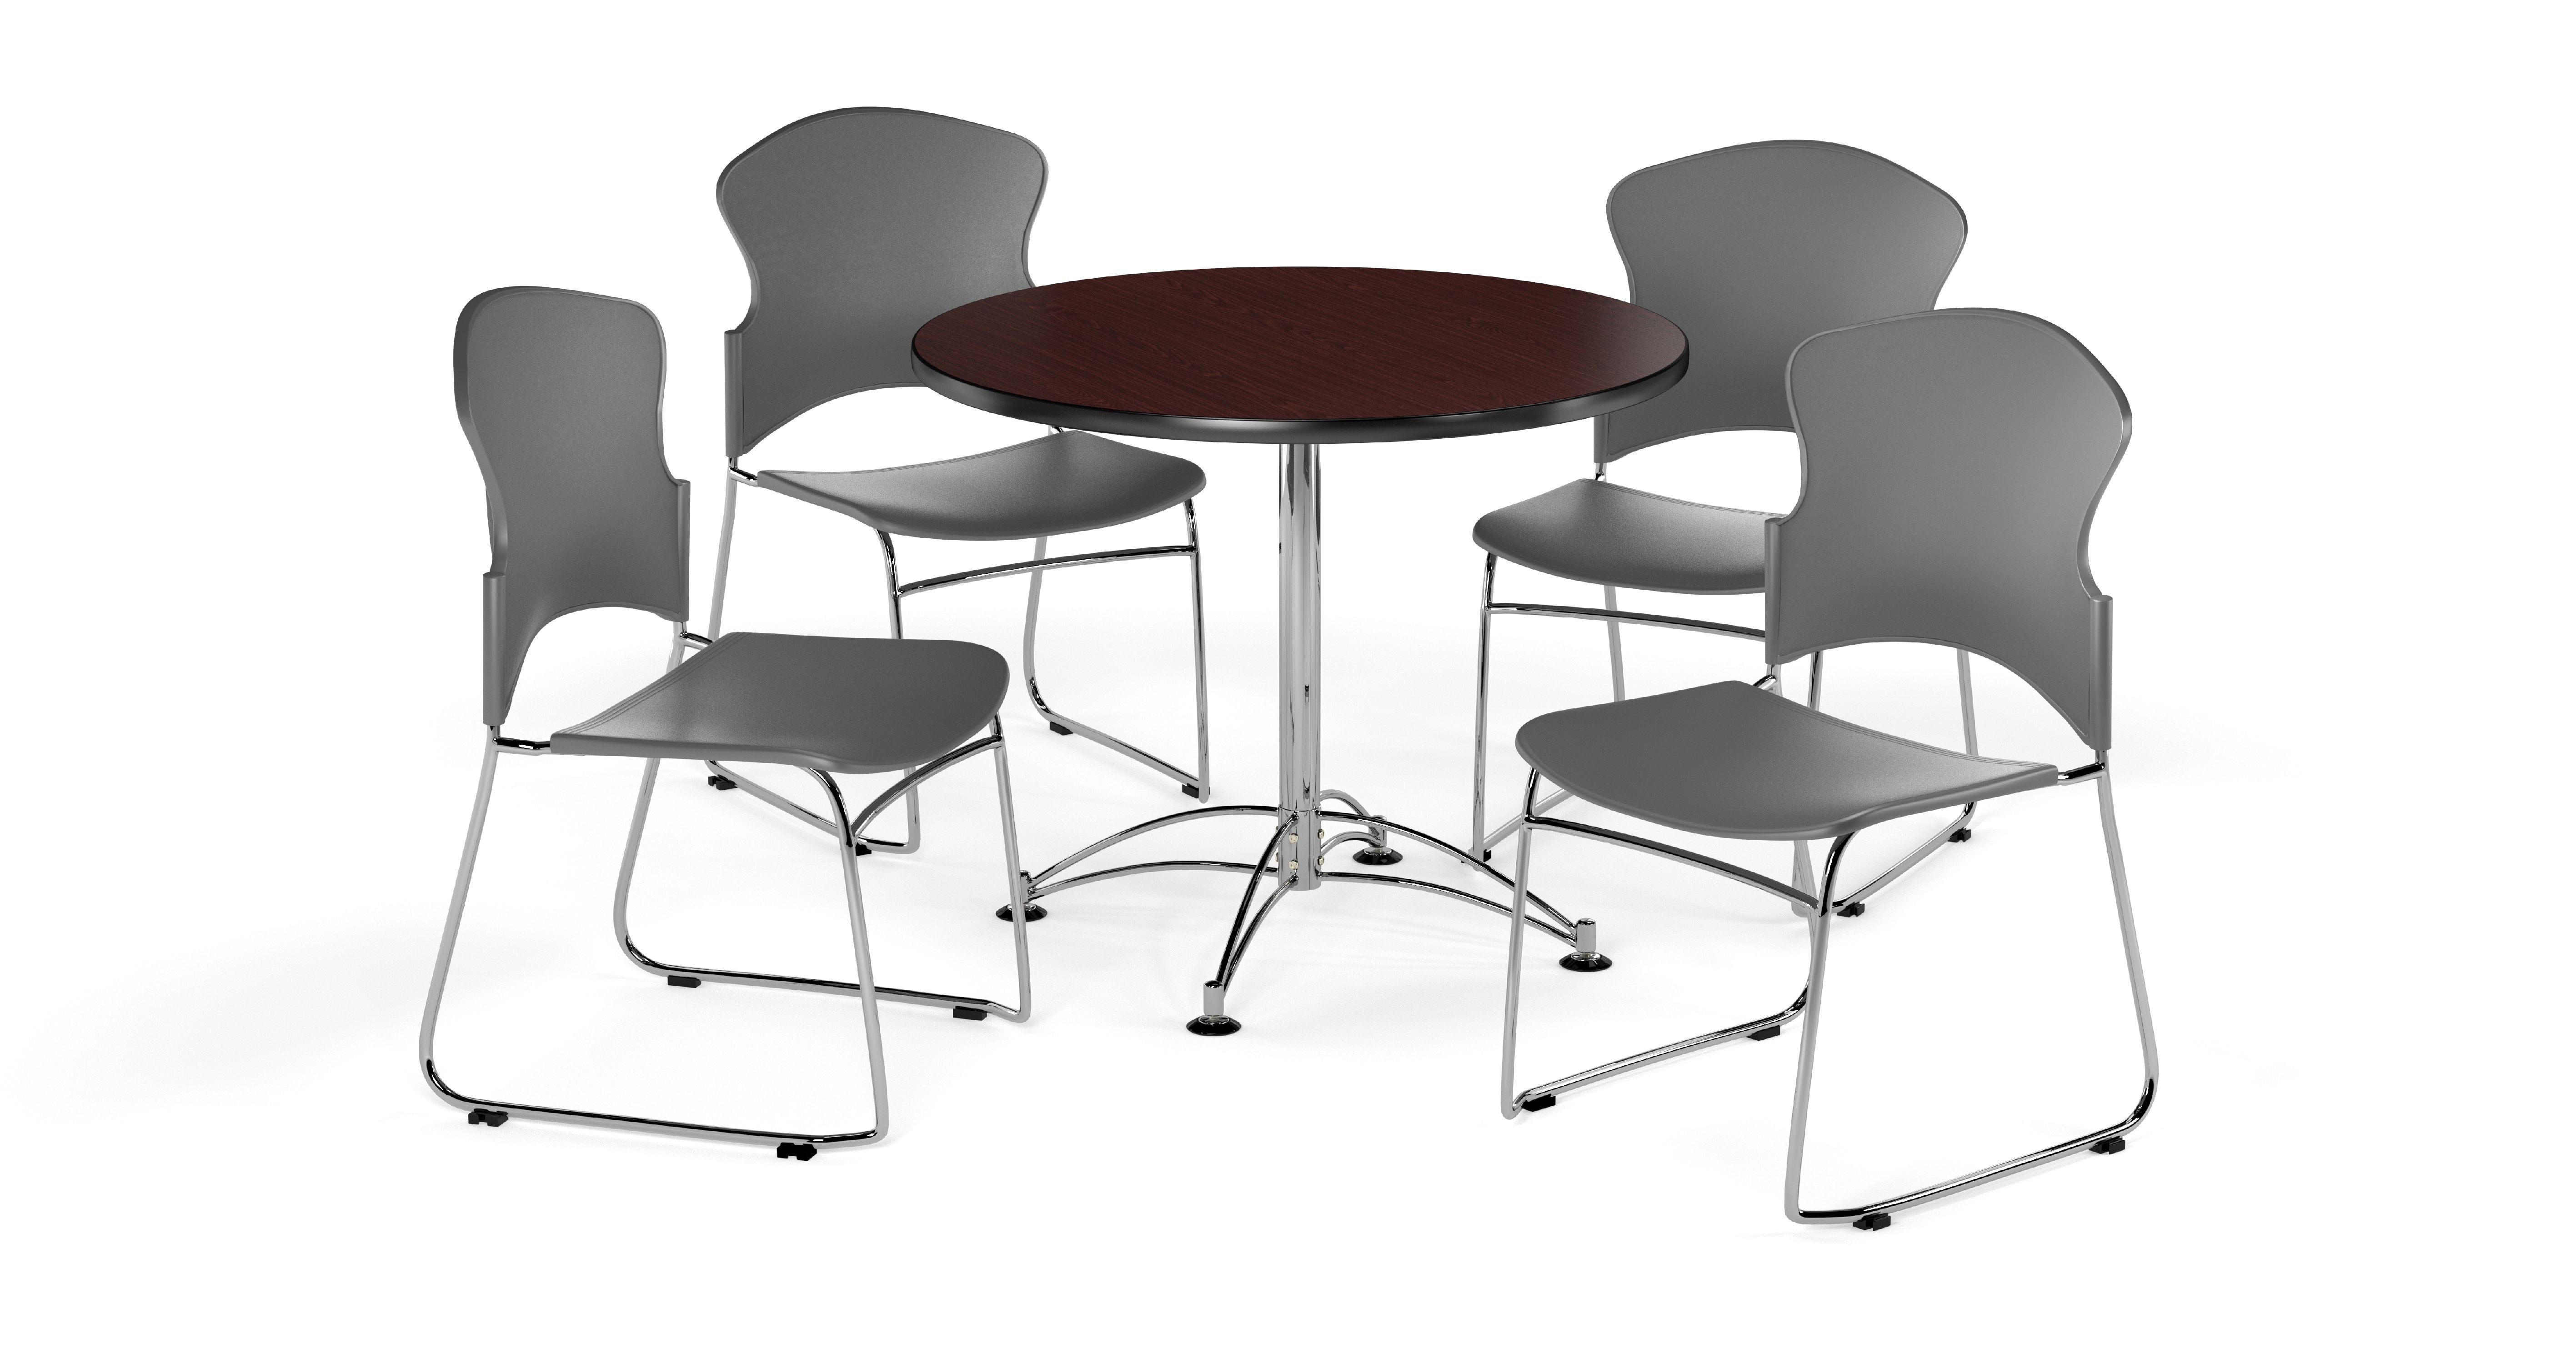 Ofm Multi Use Break Room Package 36 Round Table With Plastic Stack Chairs Mahogany Finish With Chrome Plated Steel Base And Gray Seats Pkg Brk 08